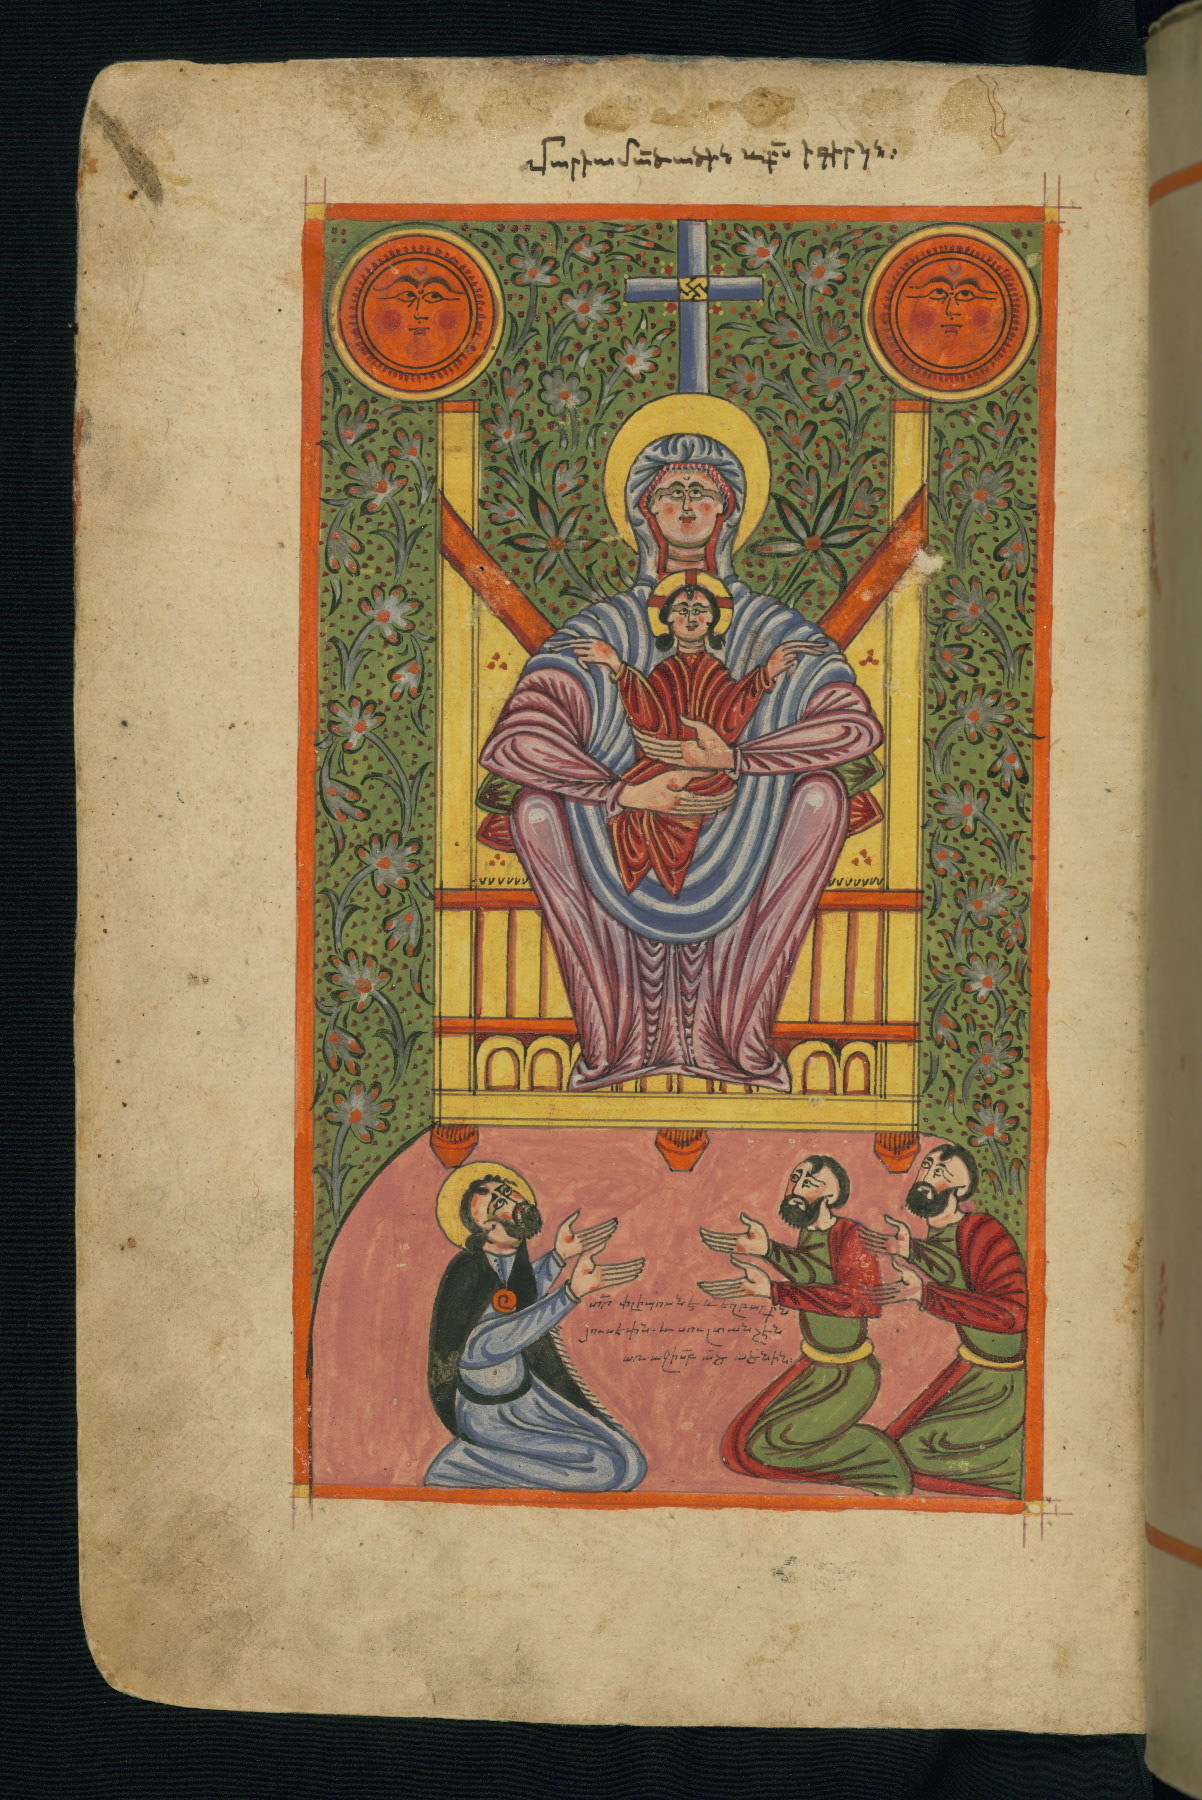 sexycodicology:
“ Gospels, Virgin and Child Enthroned (Theotokos), Worshiped by Pʿilipos and his brothers Yusēpʿ and Sultanša, Walters Manuscript W.543, fol. 14v by Walters Art Museum Illuminated Manuscripts http://flic.kr/p/e8g37G
”